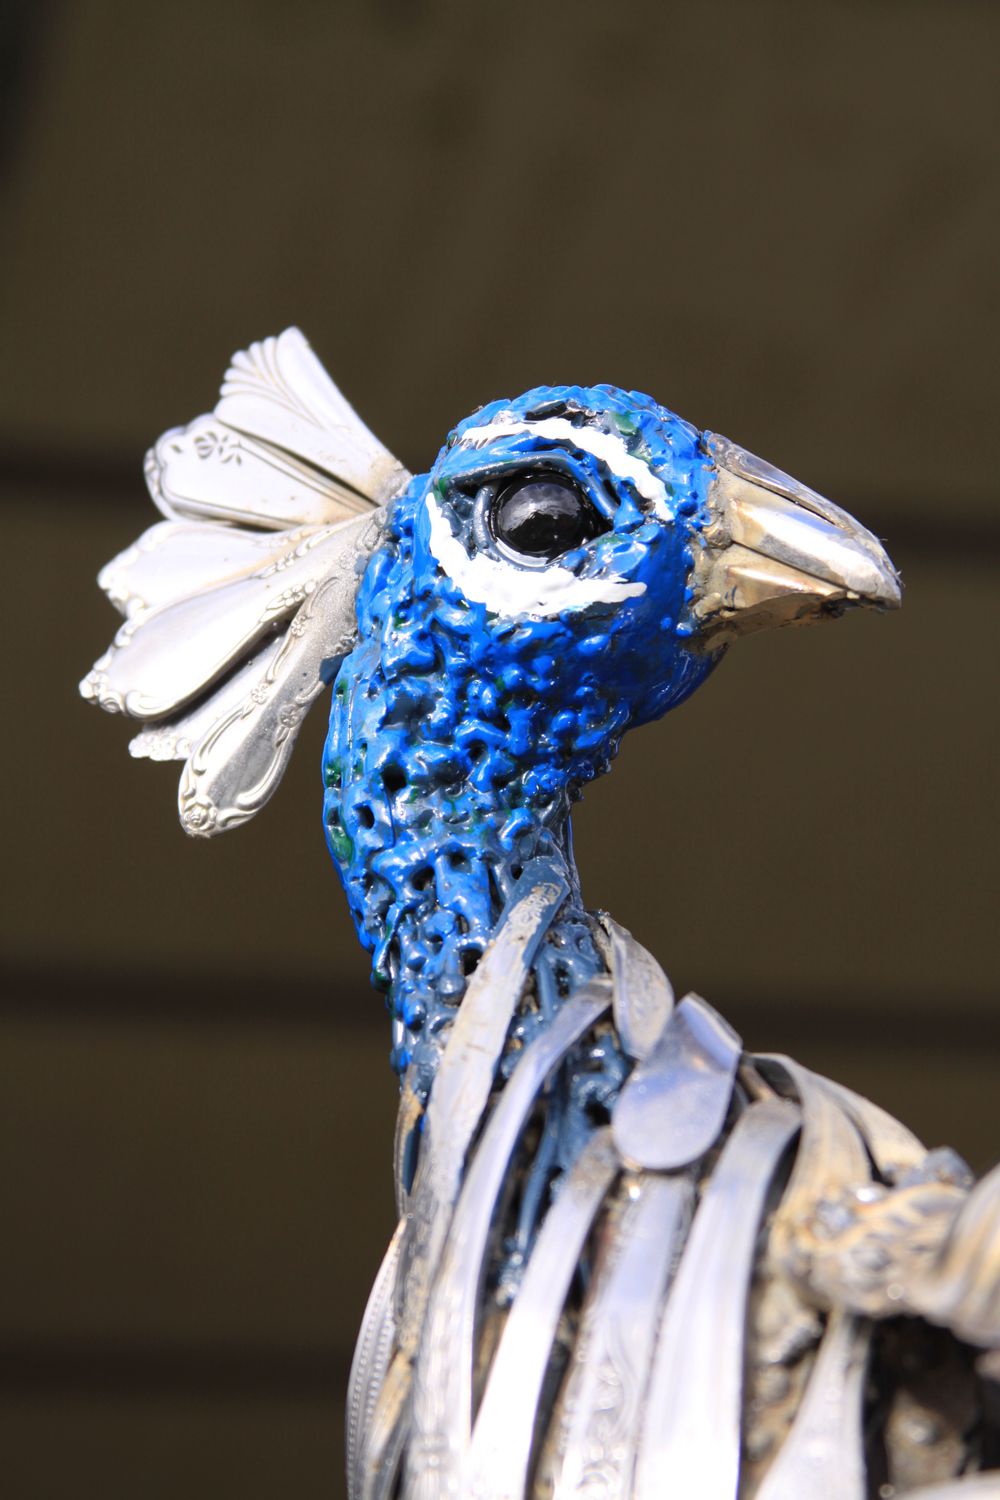 Scrap Metal Turned Into Extraordinary Sculptures By John Lopez 14